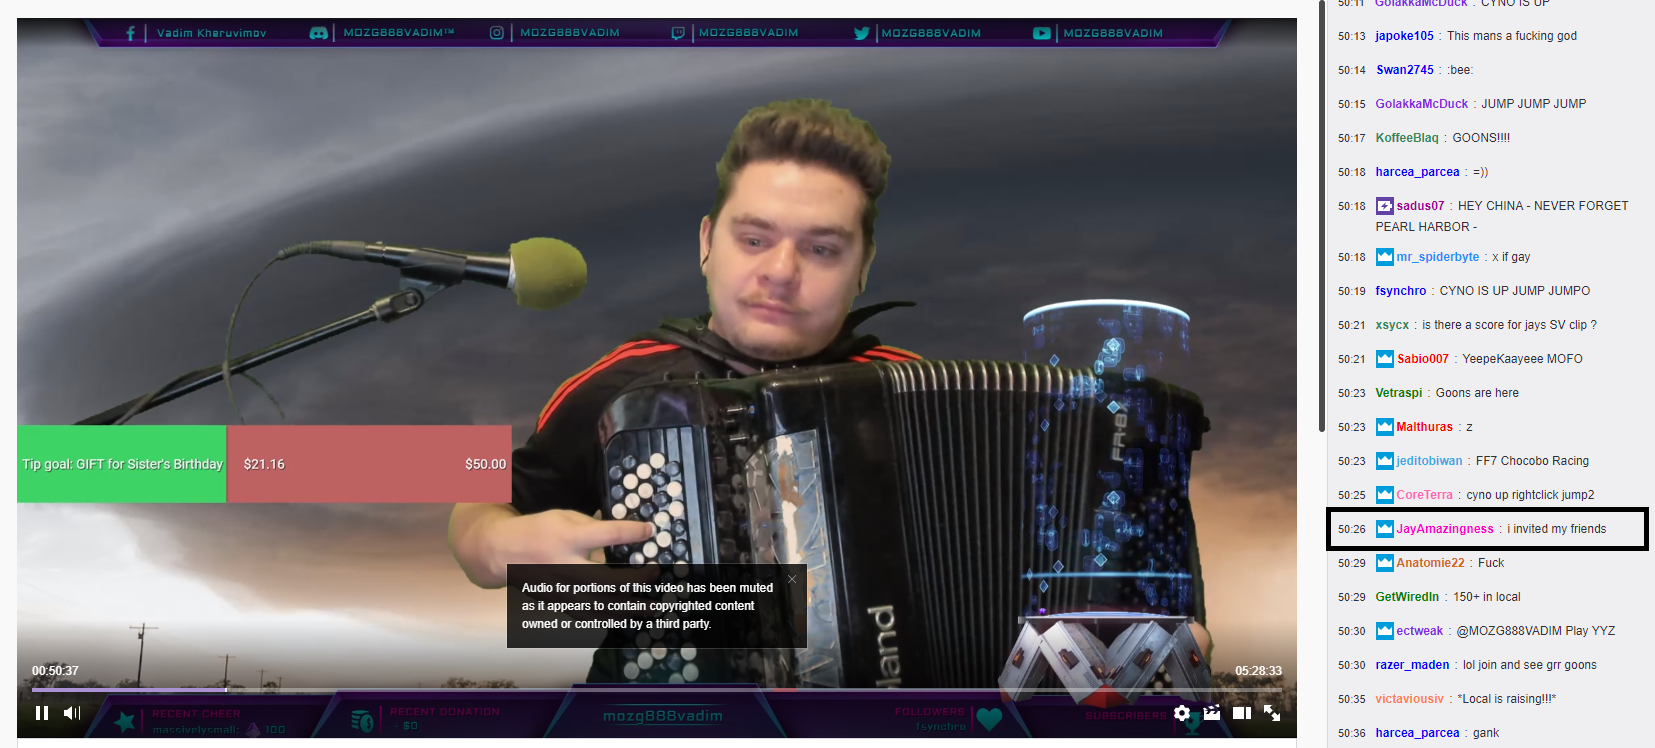 EVE Online Trolls Raided An Accordion Player’s Twitch Stream And It Was Awesome